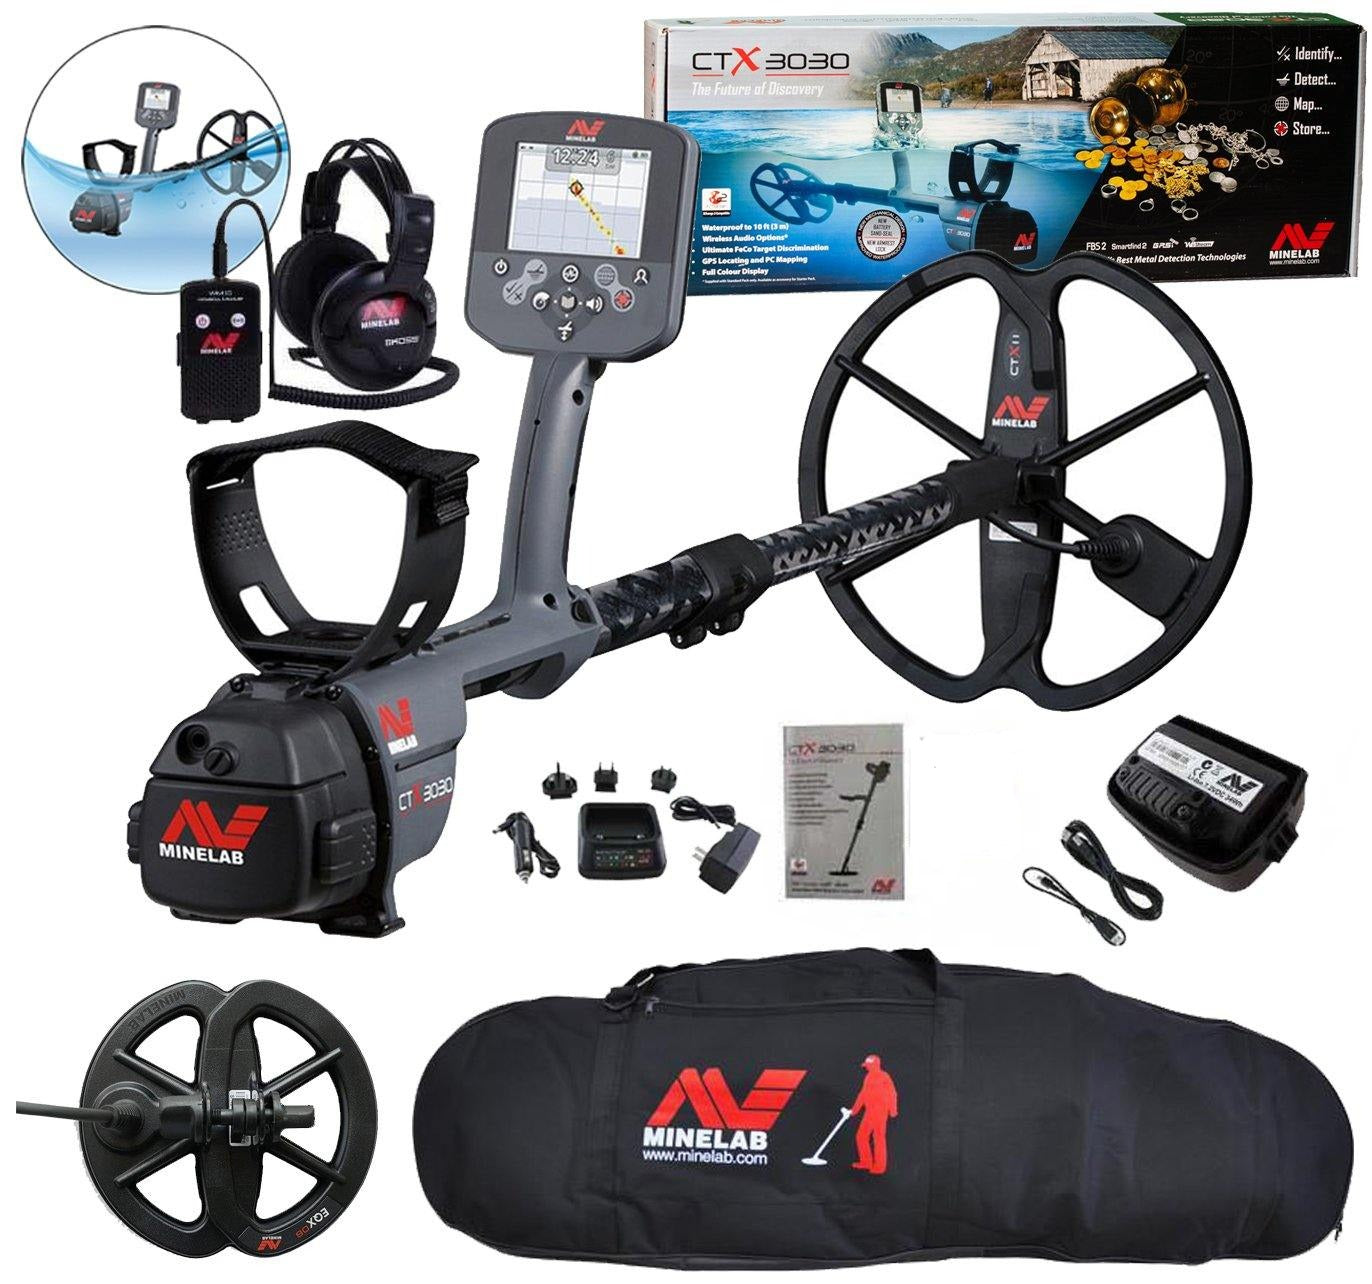 Minelab CTX 3030 Waterproof Metal Detector with 6" DD Smart Coil and Carry Bag